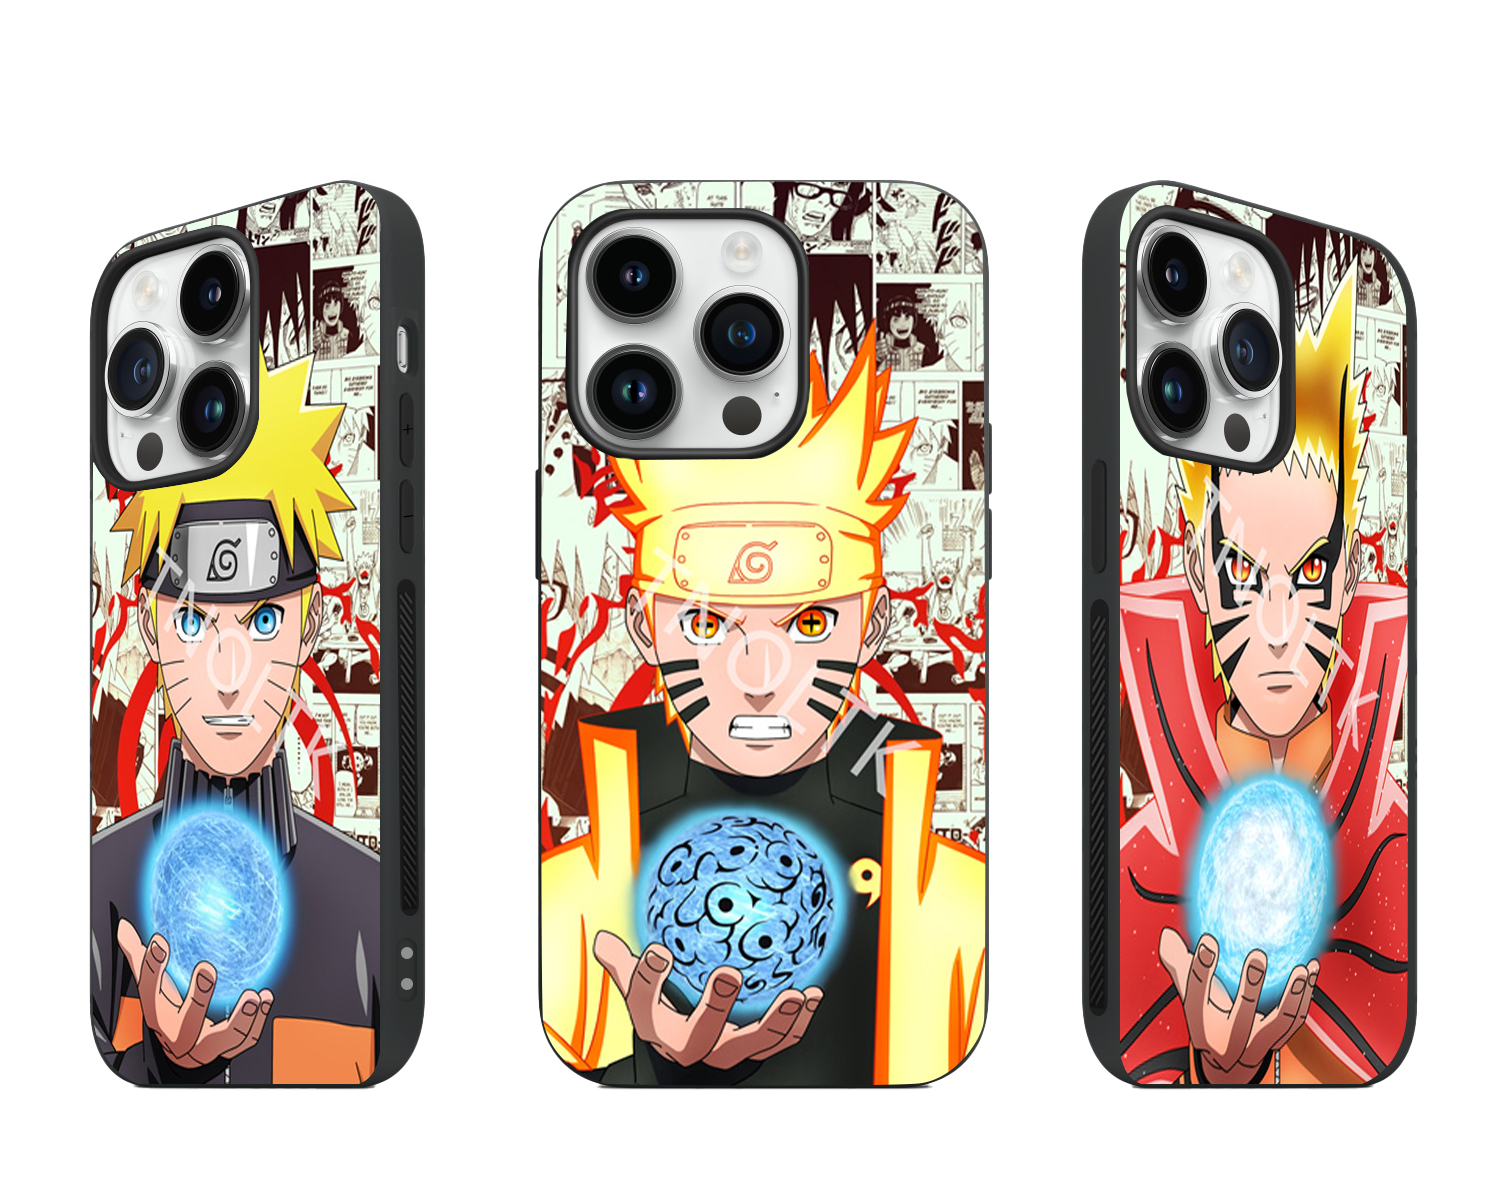 3D Motion iPhone Naruto Anime Phone Cases